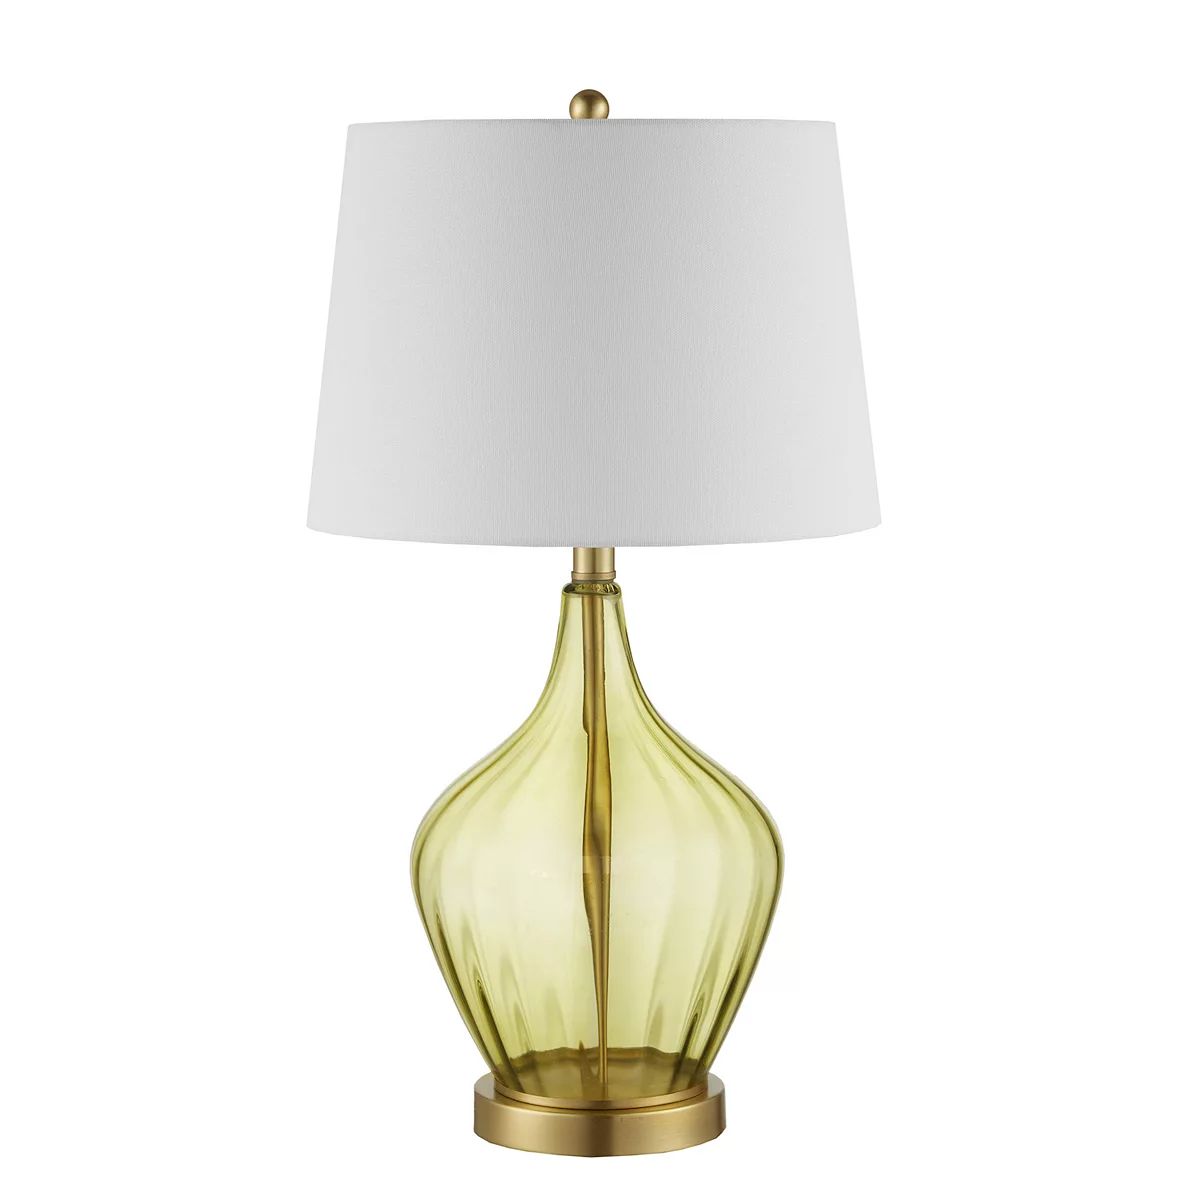 Radiance Glass Table Lamp | Kohl's